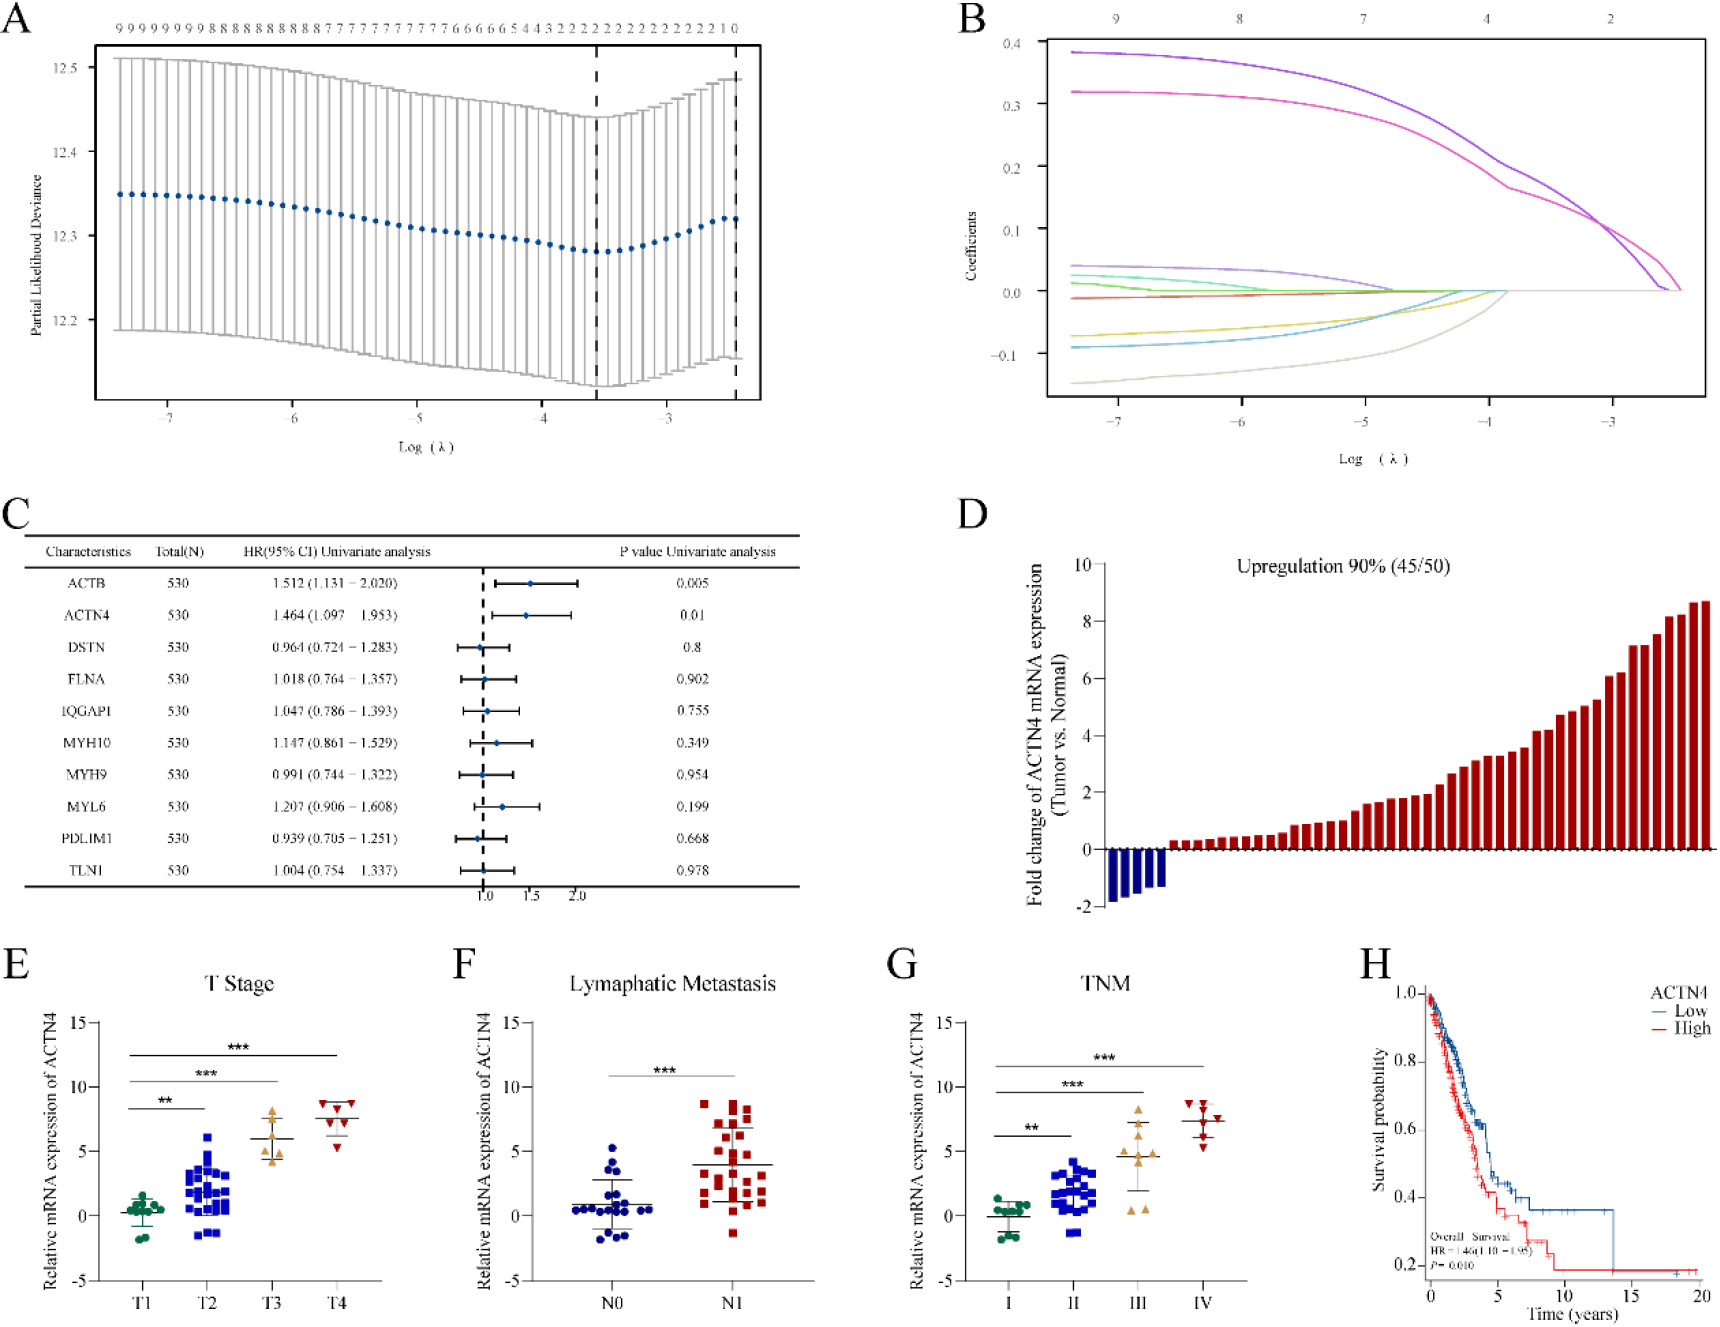 Construction of a risk prognostic model based on disulfidptosis-related genes (DRGs) in TCGA-LUAD. (A) LASSO regression of DRGs. (B) Cross-validation for tuning the parameter selection in the LASSO regression. (C) Univariate Cox regression analysis of DRGs. (D) The mRNA expression of ACTN4 is upregulated in 90% of 50 lung adenocarcinoma (LUAD) tissues compared to normal tissues. The mRNA expression of ACTN4 was positively with (E) T stage (**P< 0.01), (F) lymphatic metastasis (**P< 0.001), and (G) TNM stage (**P < 0.01). (H) LUAD patients with high expression of ACTN4 have a lower percentage of overall survival. **P< 0.01, and ***P< 0.001.